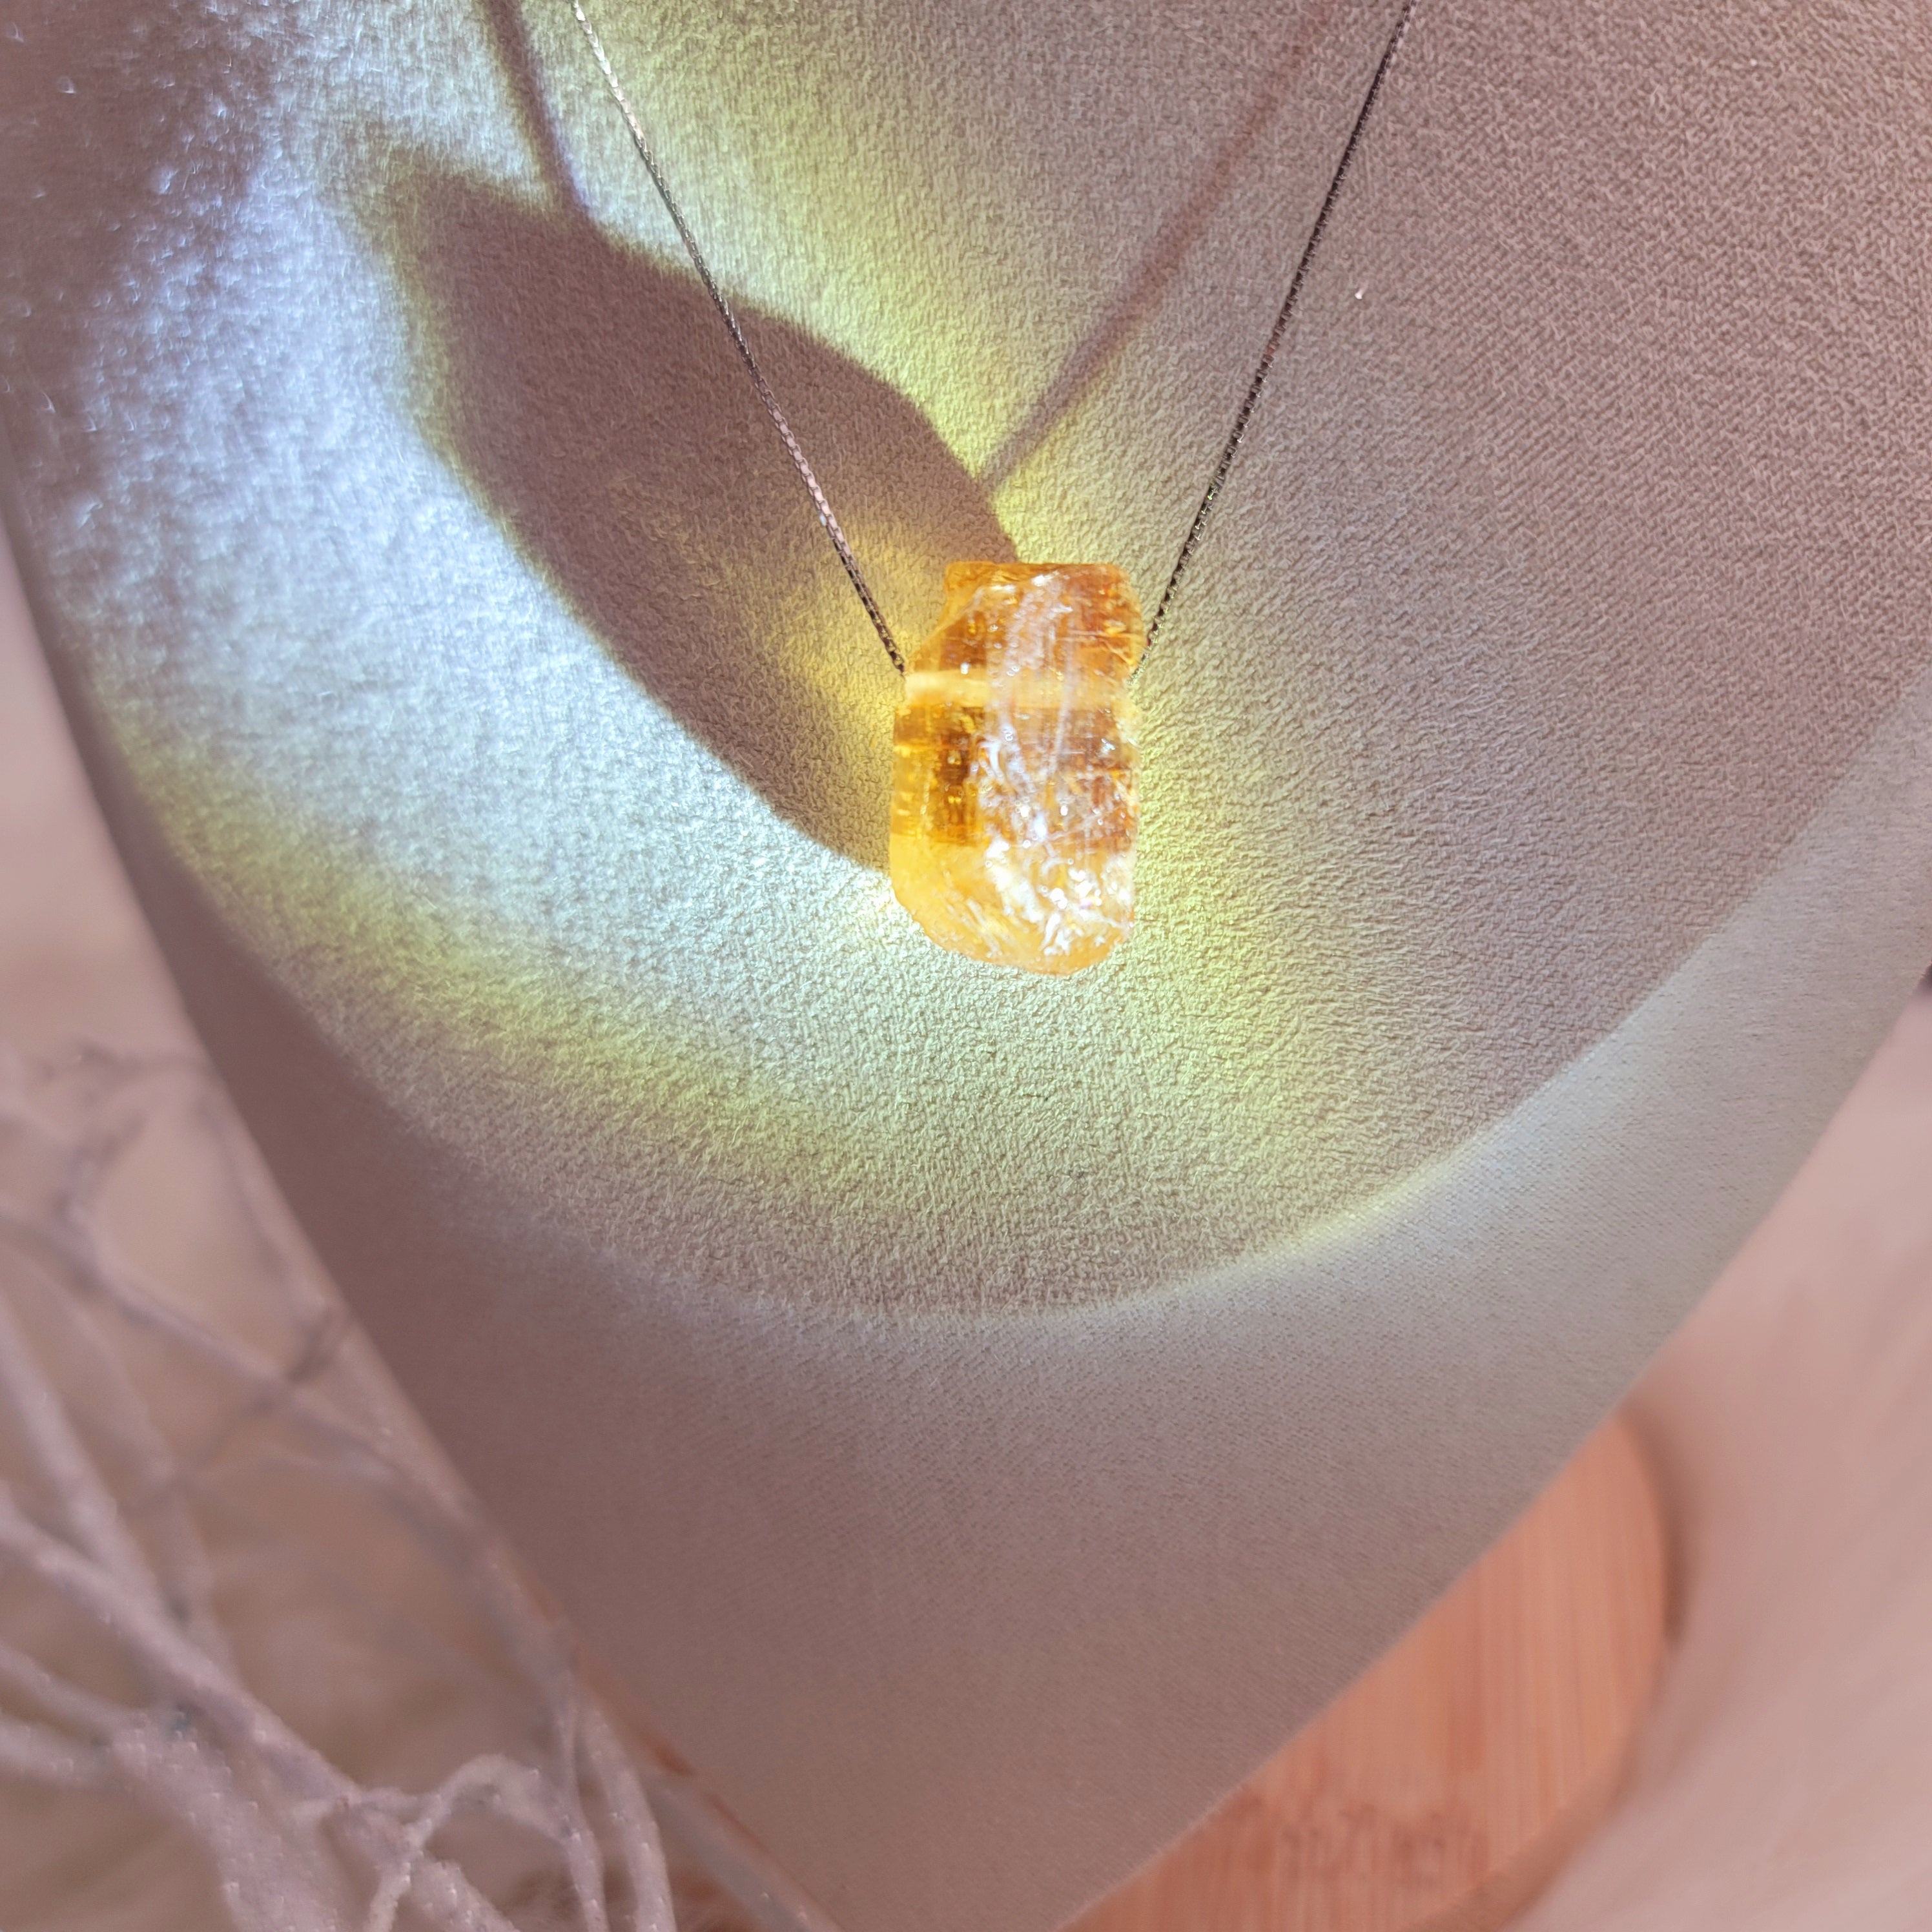 Imperial Topaz Necklace for Creativity, Manifesting Abundance and Strength